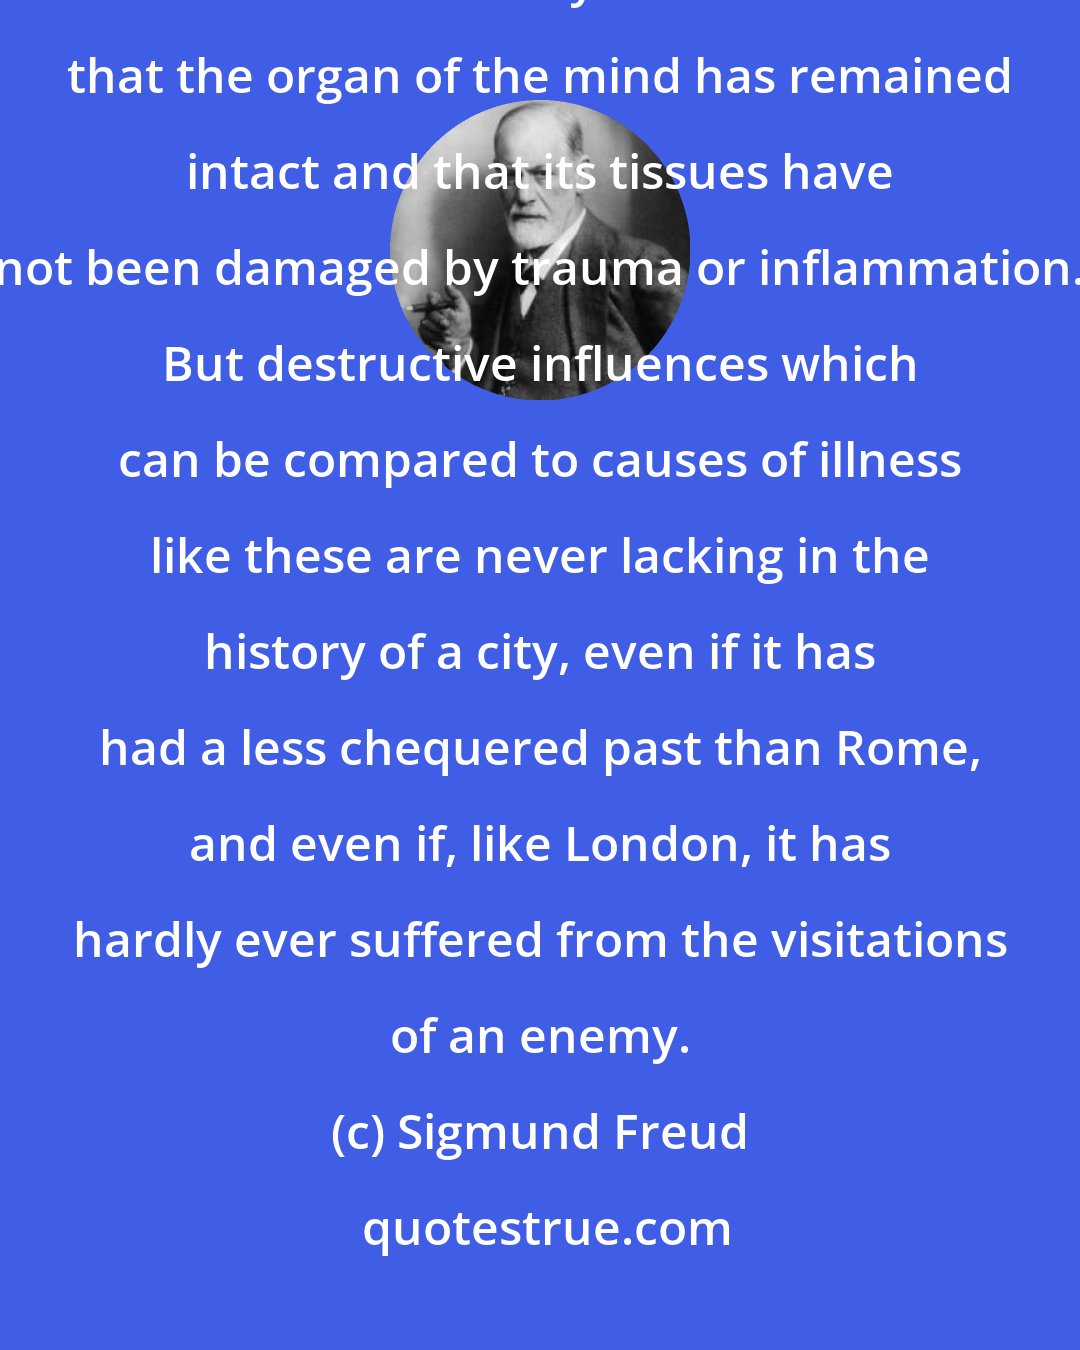 Sigmund Freud: The assumption that everything past is preserved holds good even in mental life only on condition that the organ of the mind has remained intact and that its tissues have not been damaged by trauma or inflammation. But destructive influences which can be compared to causes of illness like these are never lacking in the history of a city, even if it has had a less chequered past than Rome, and even if, like London, it has hardly ever suffered from the visitations of an enemy.